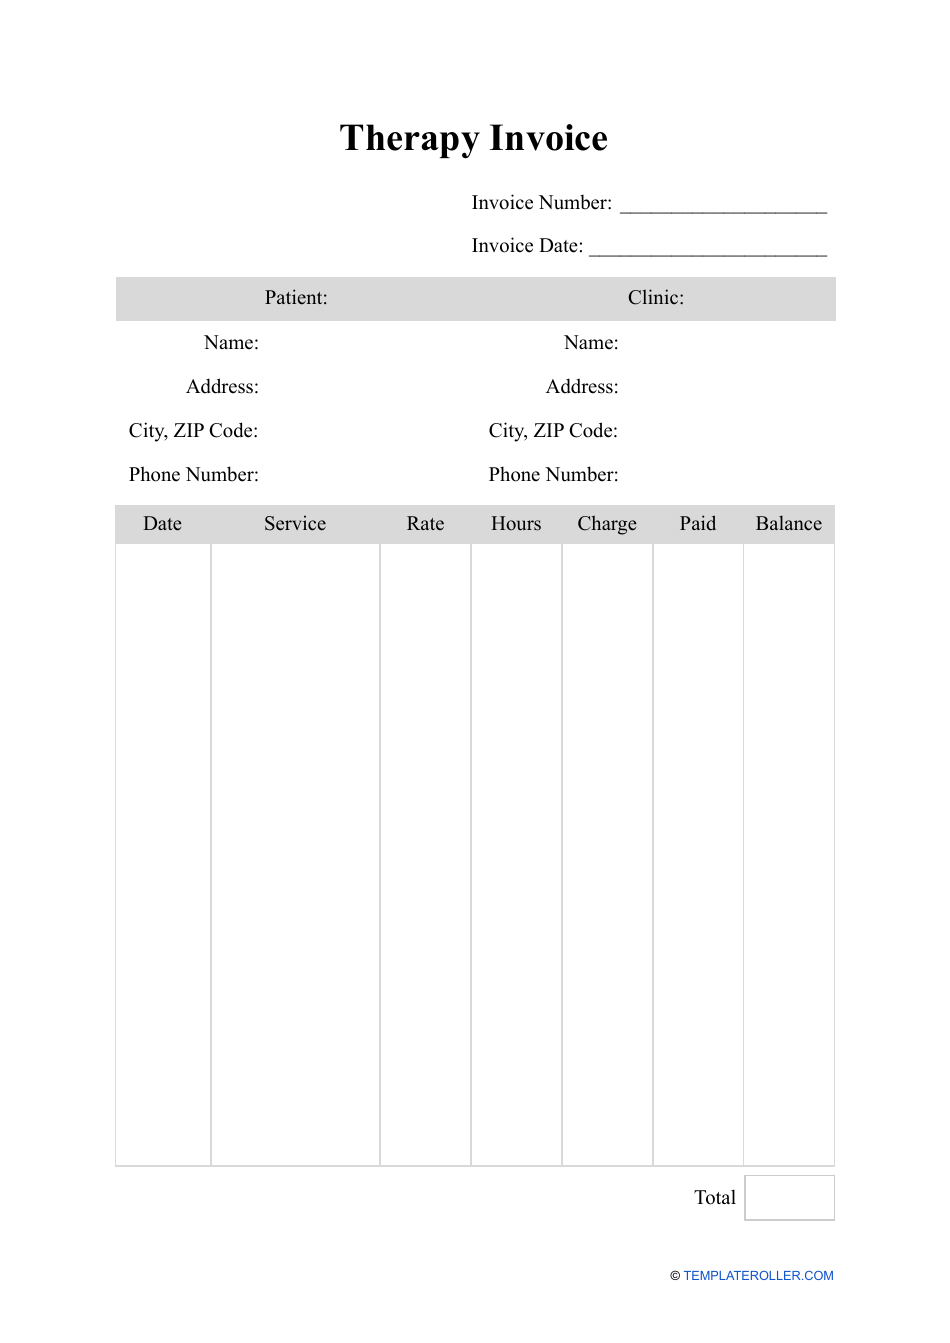 Therapy Invoice Template Fill Out Sign Online And Download PDF Templateroller